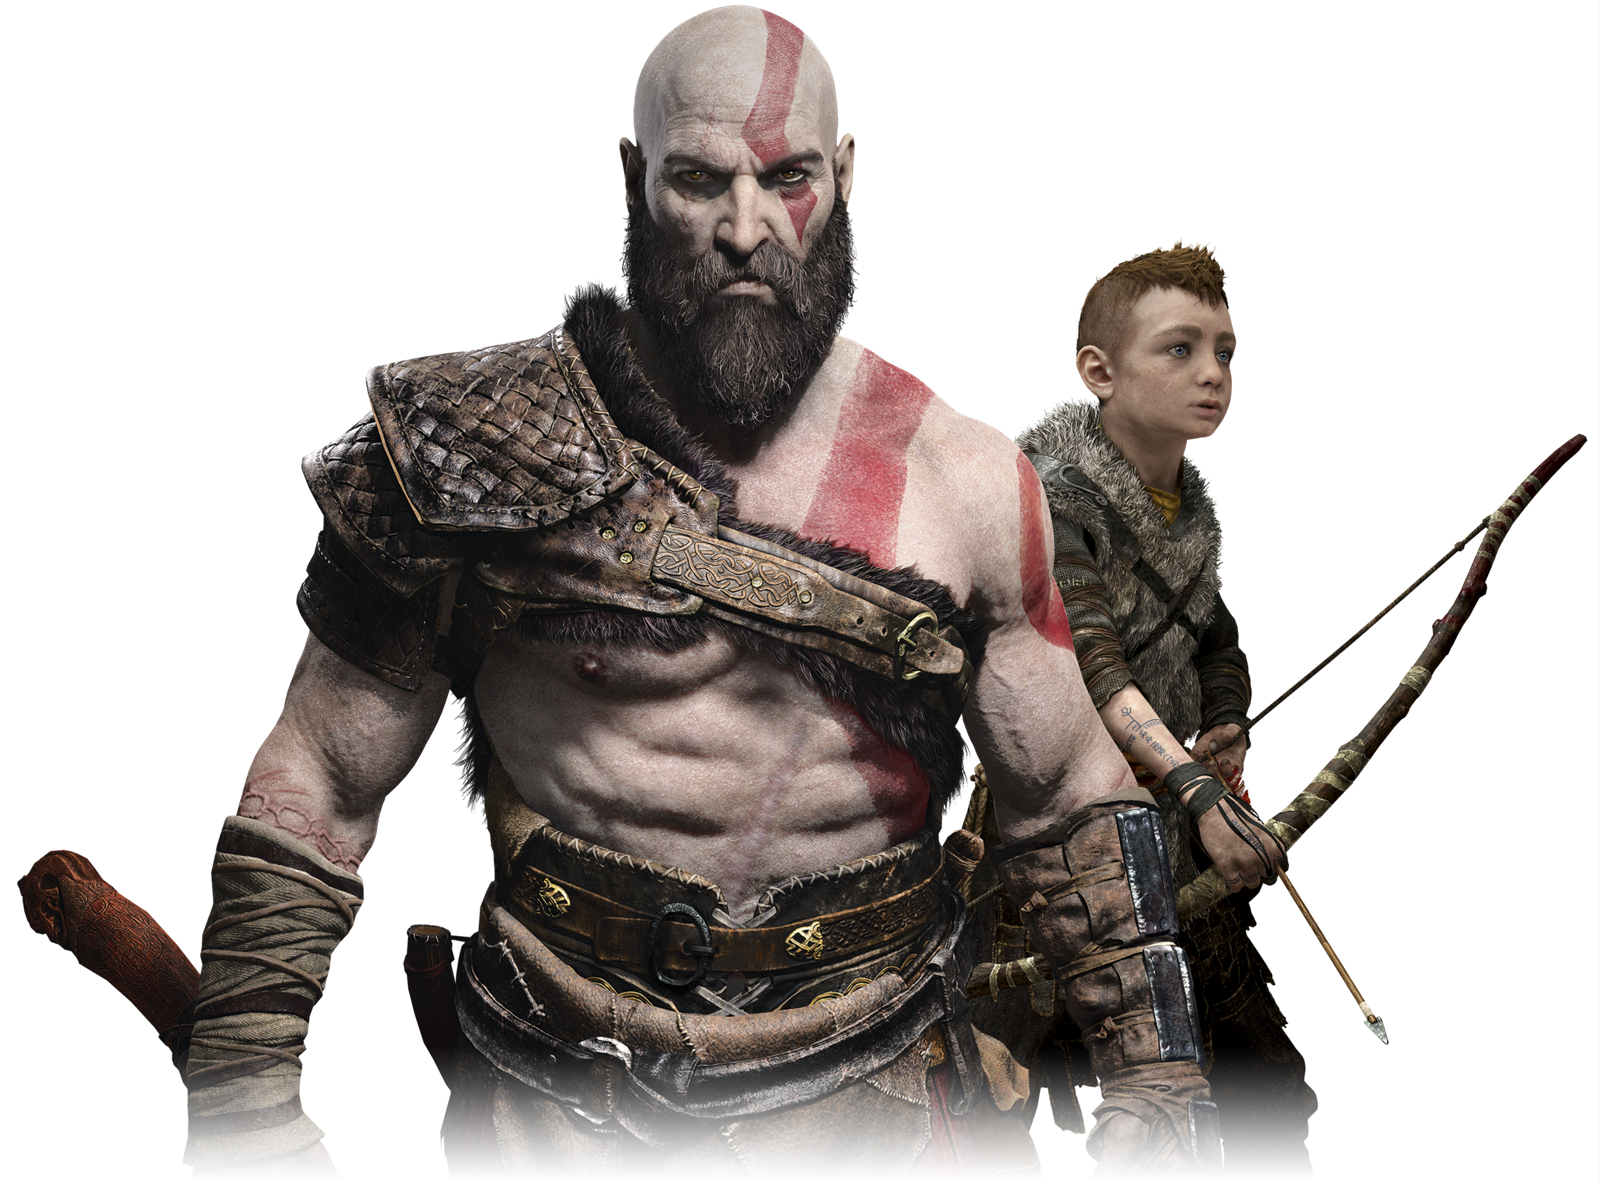 The PC version of God of War has been in the making for at least 2 years. Mod support is not planned.